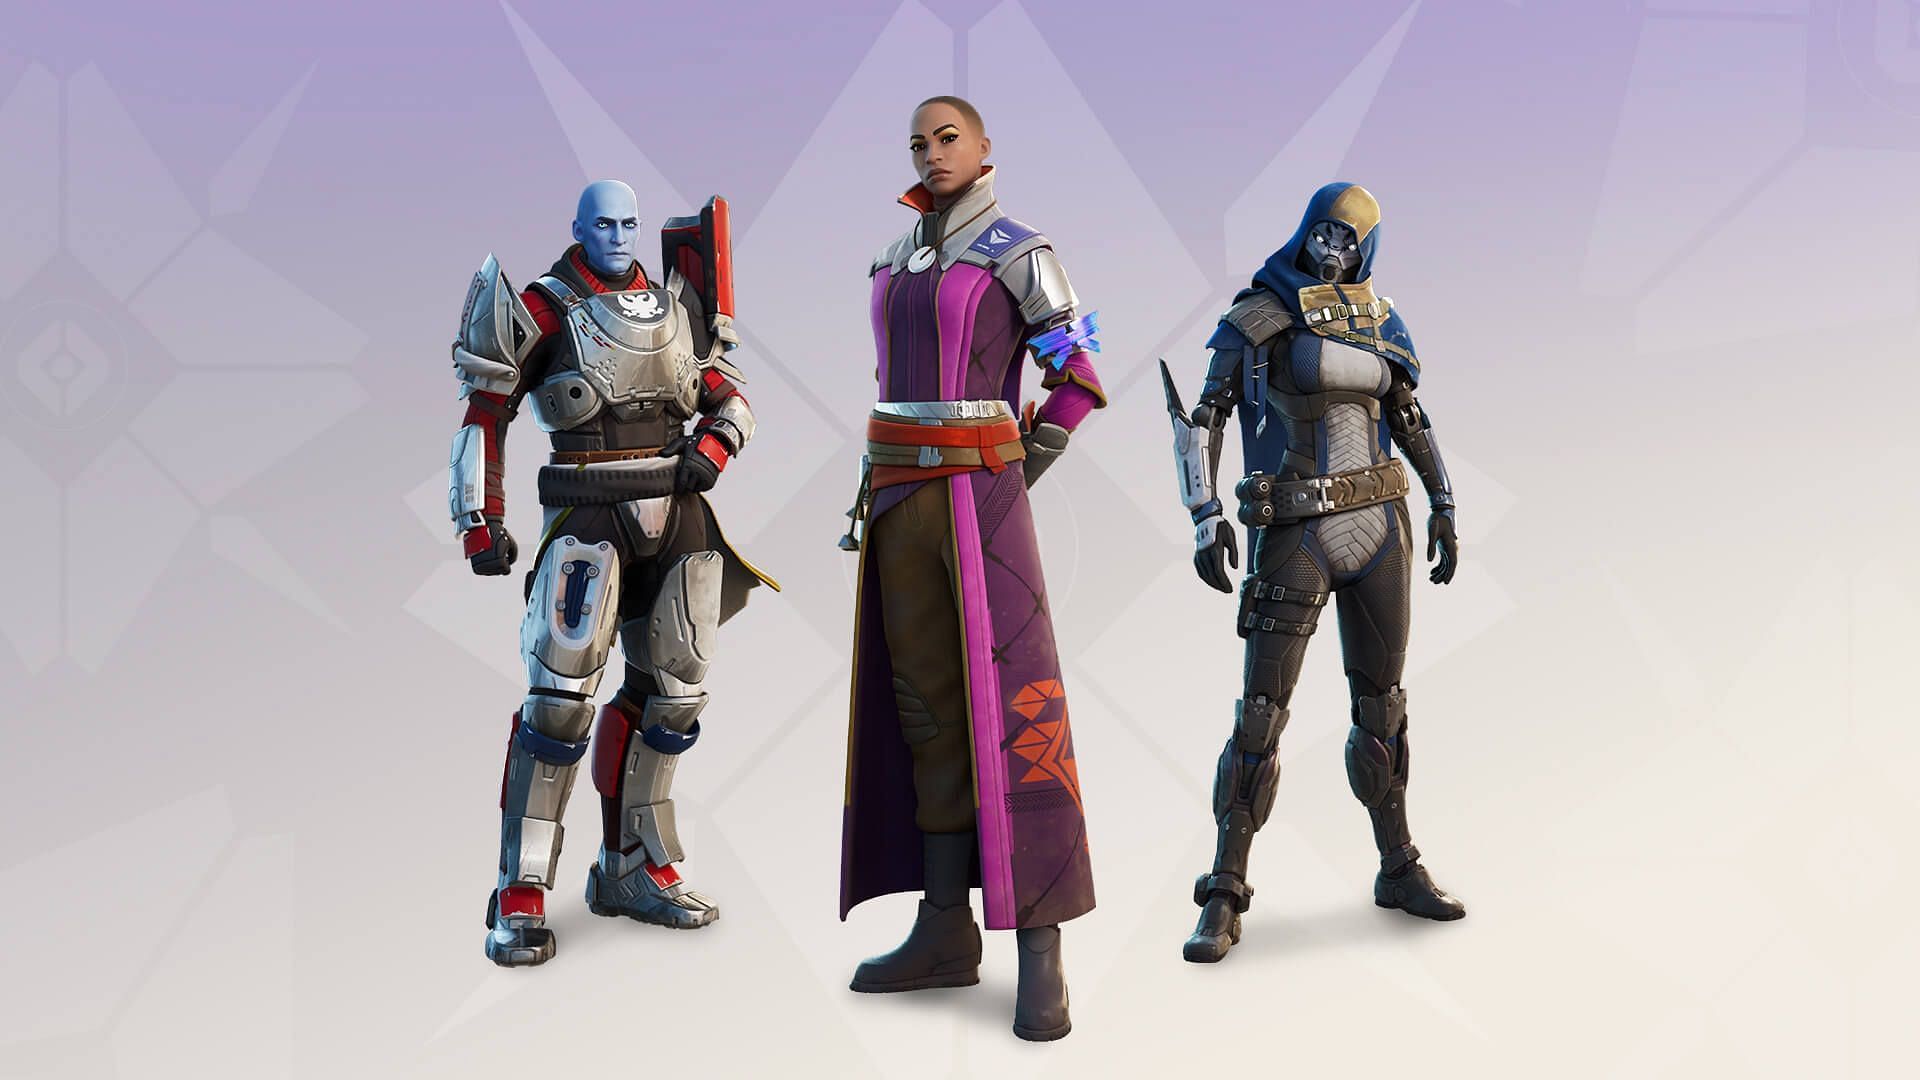 Three different Fortnite x Destiny 2 skins can be obtained in the popular battle royale game (Image via Epic Games)